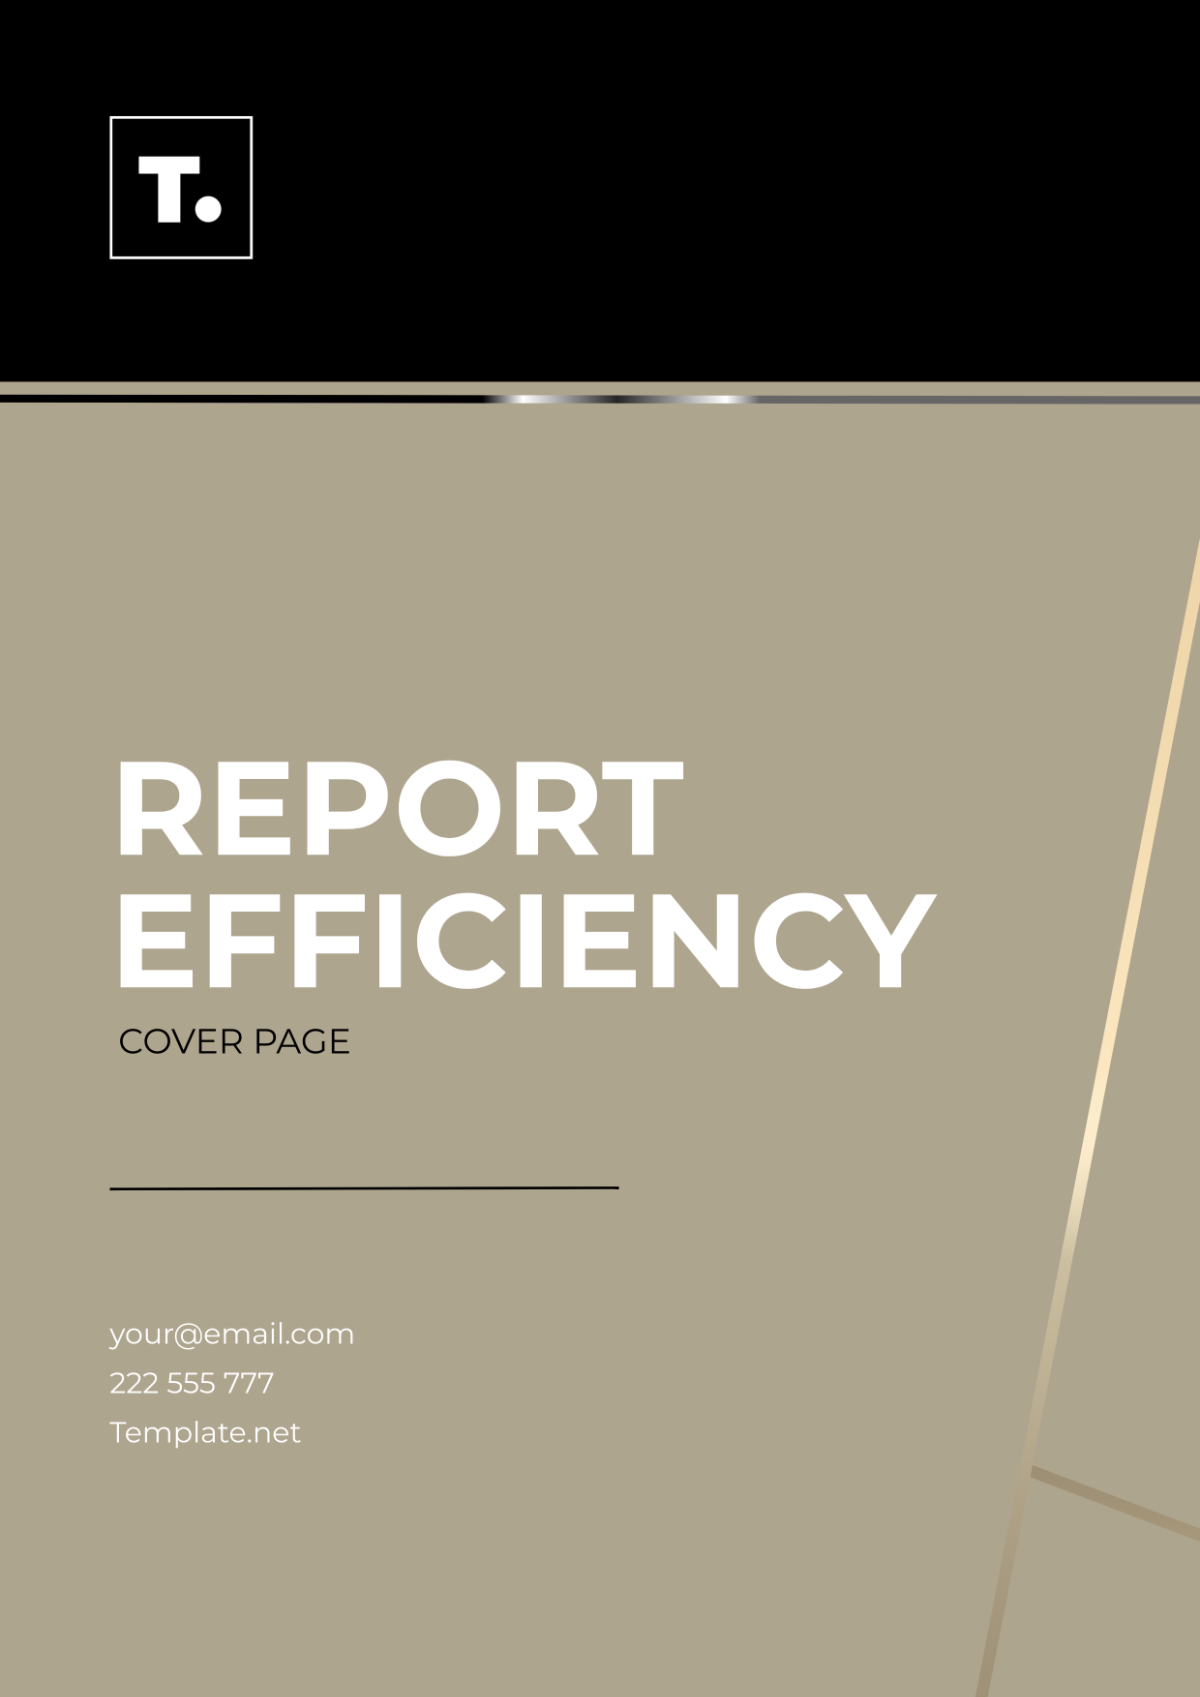 Report Efficiency Cover Page Template